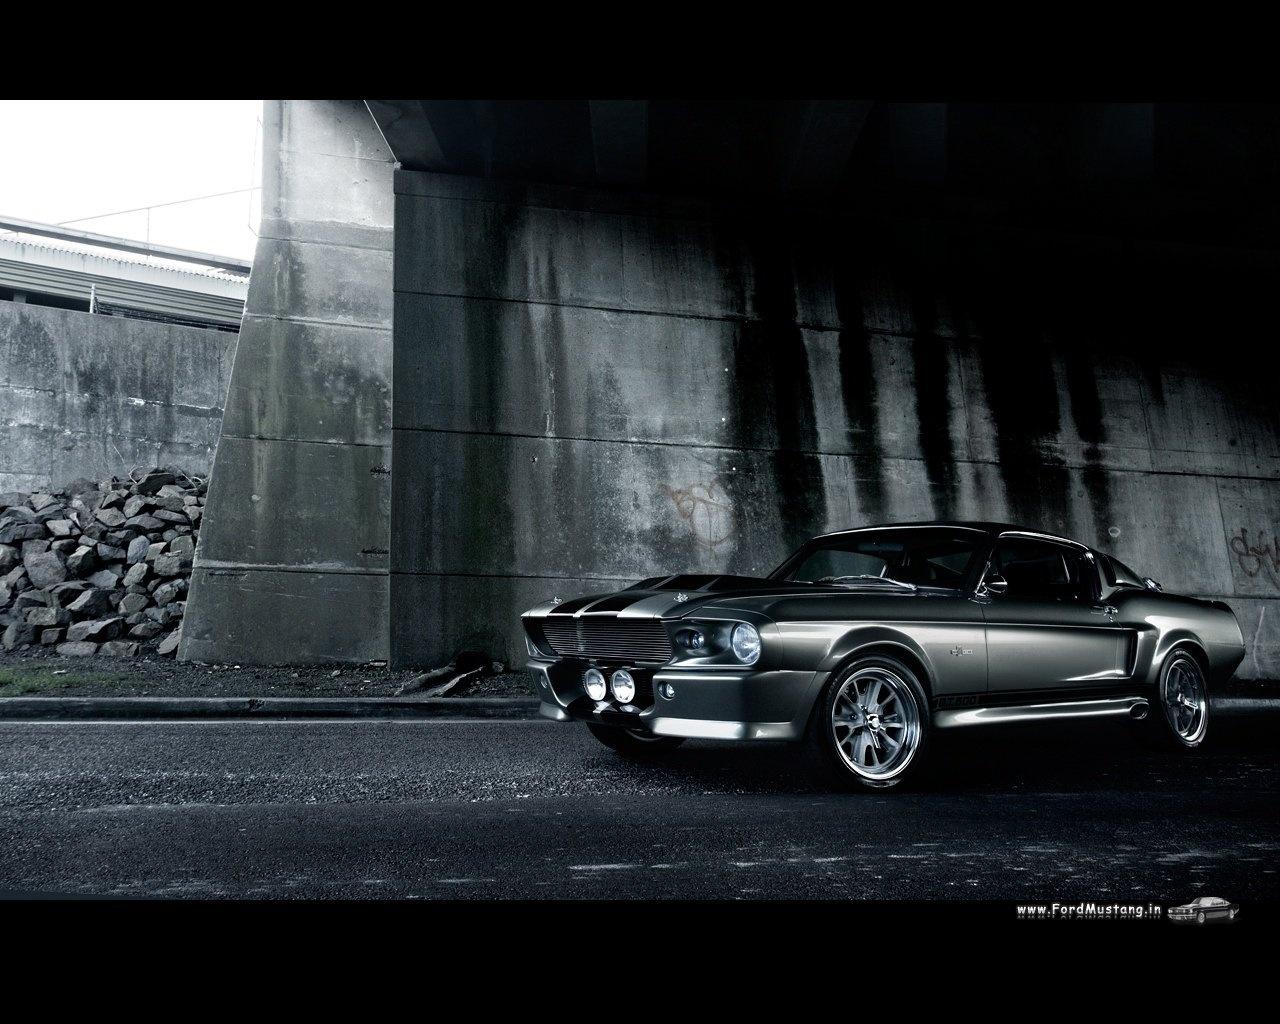 Ford Mustang Shelby GT500 Wallpaper